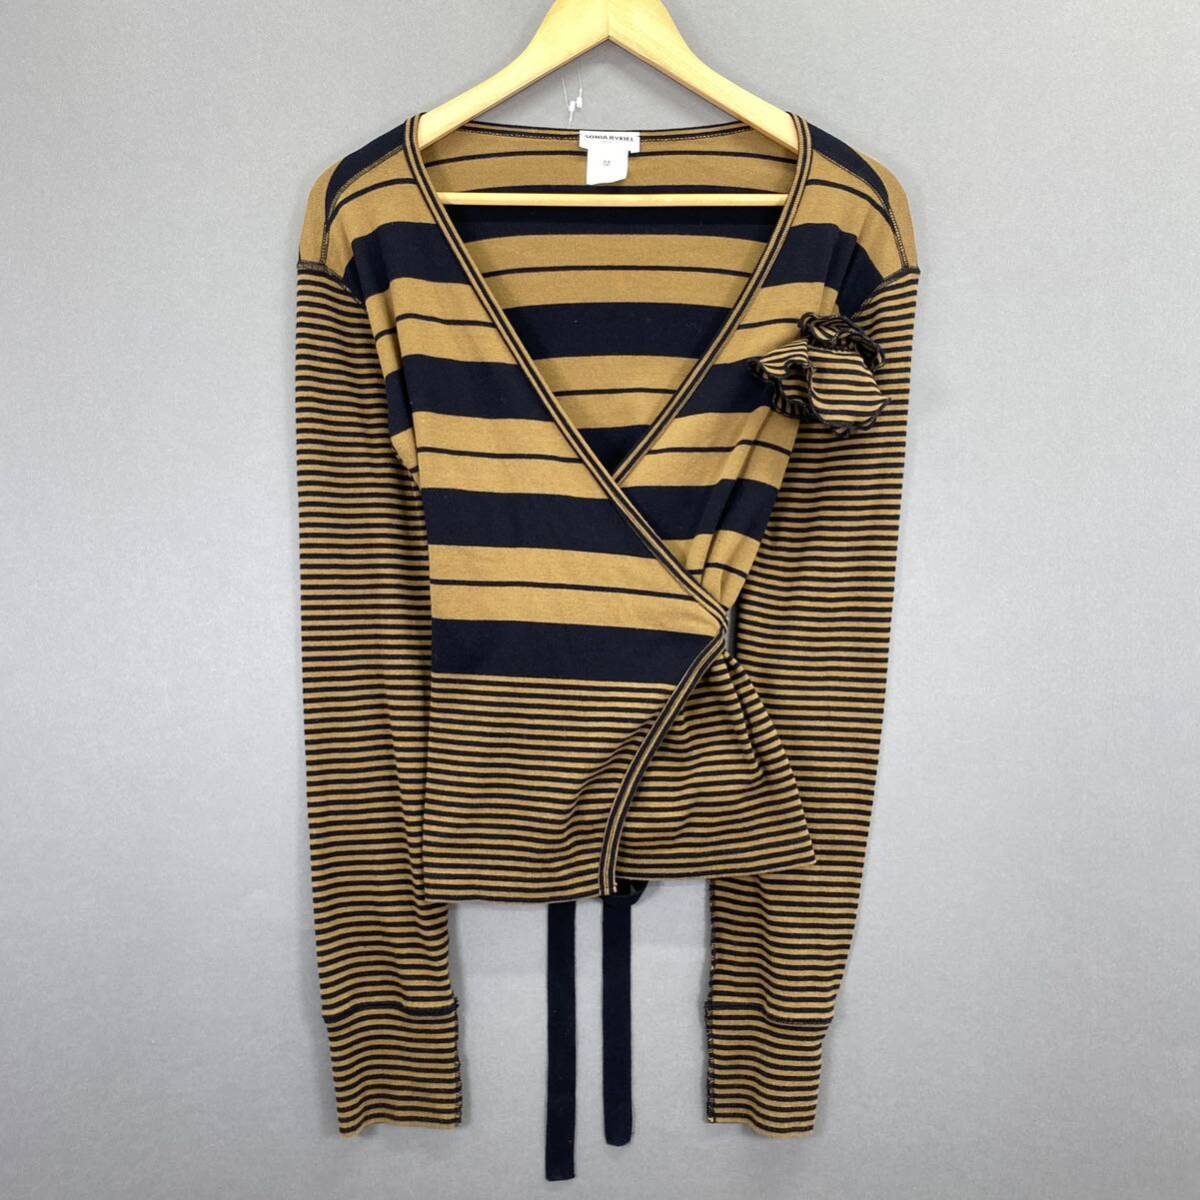 Se9 SONIA RYKIEL Sonia Rykiel long sleeve tops cotton knitted cut and sewn cardigan tops waist ribbon attaching lady's woman clothes M